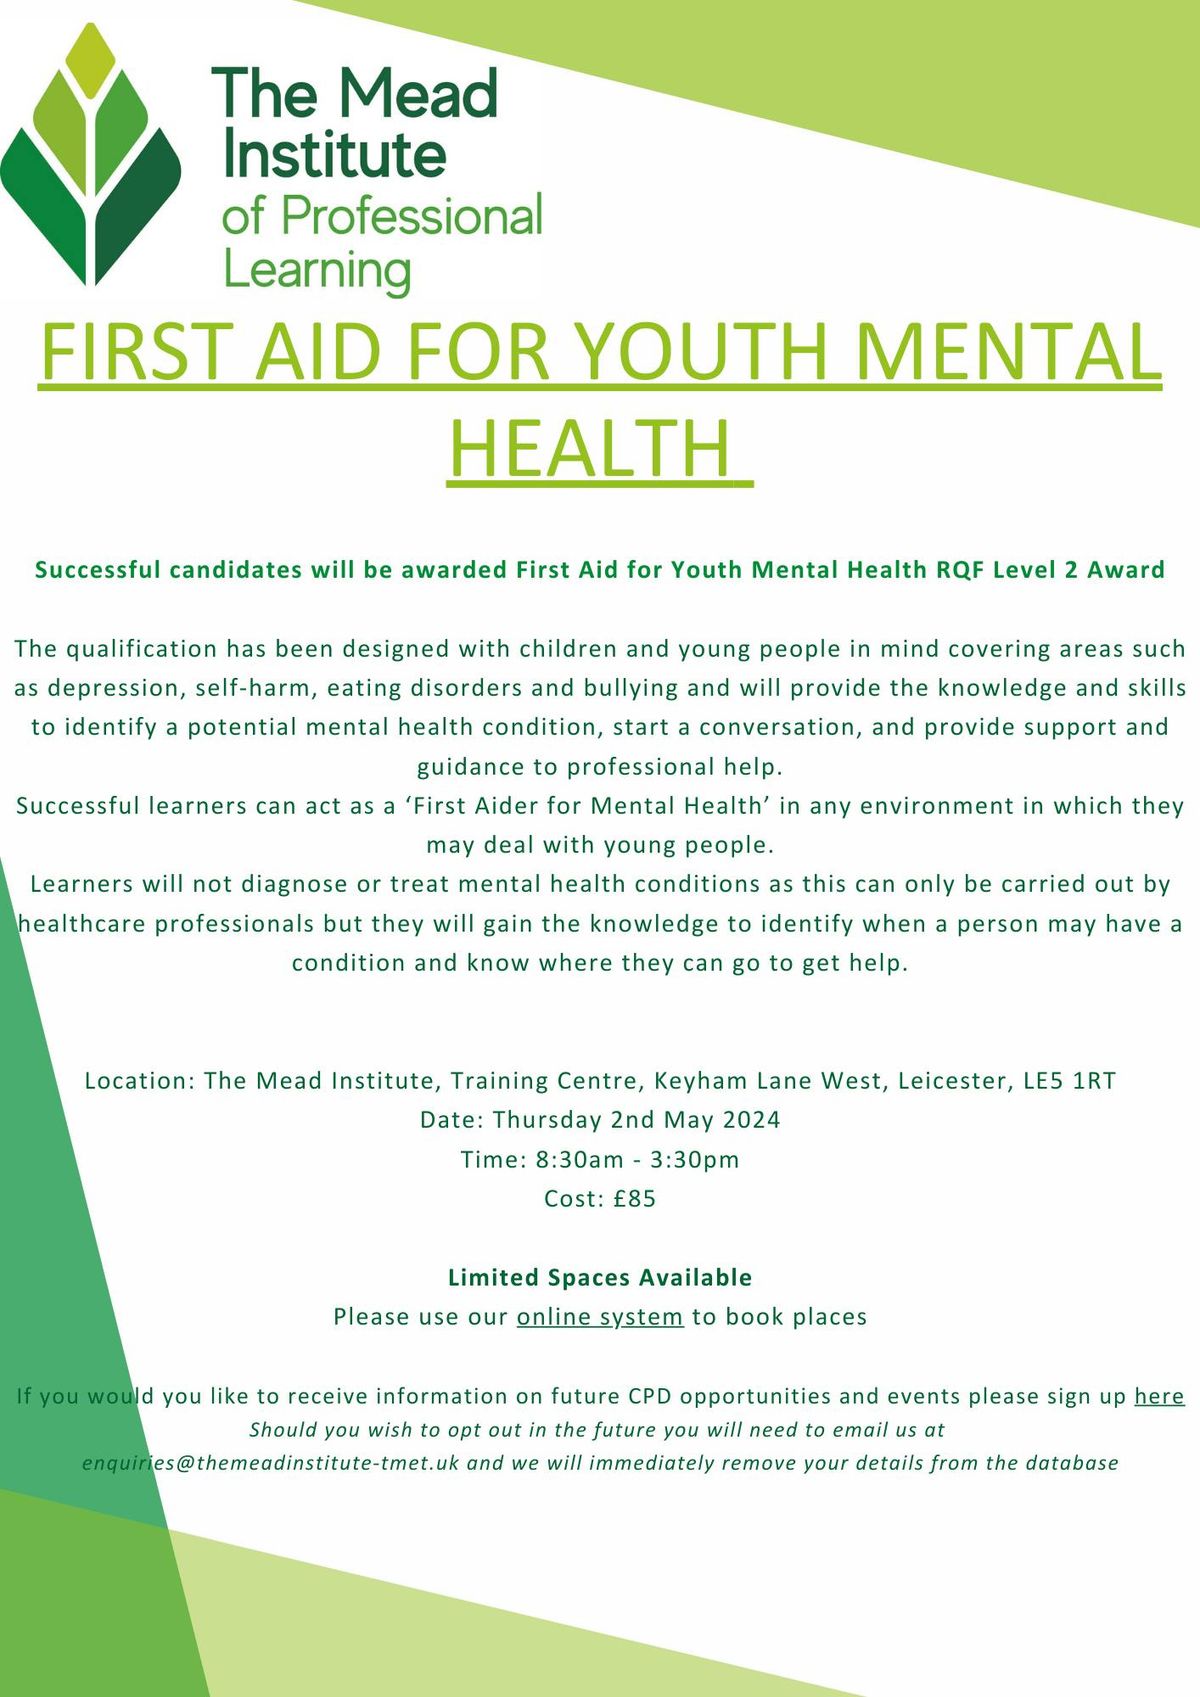 First Aid for Youths Mental Health